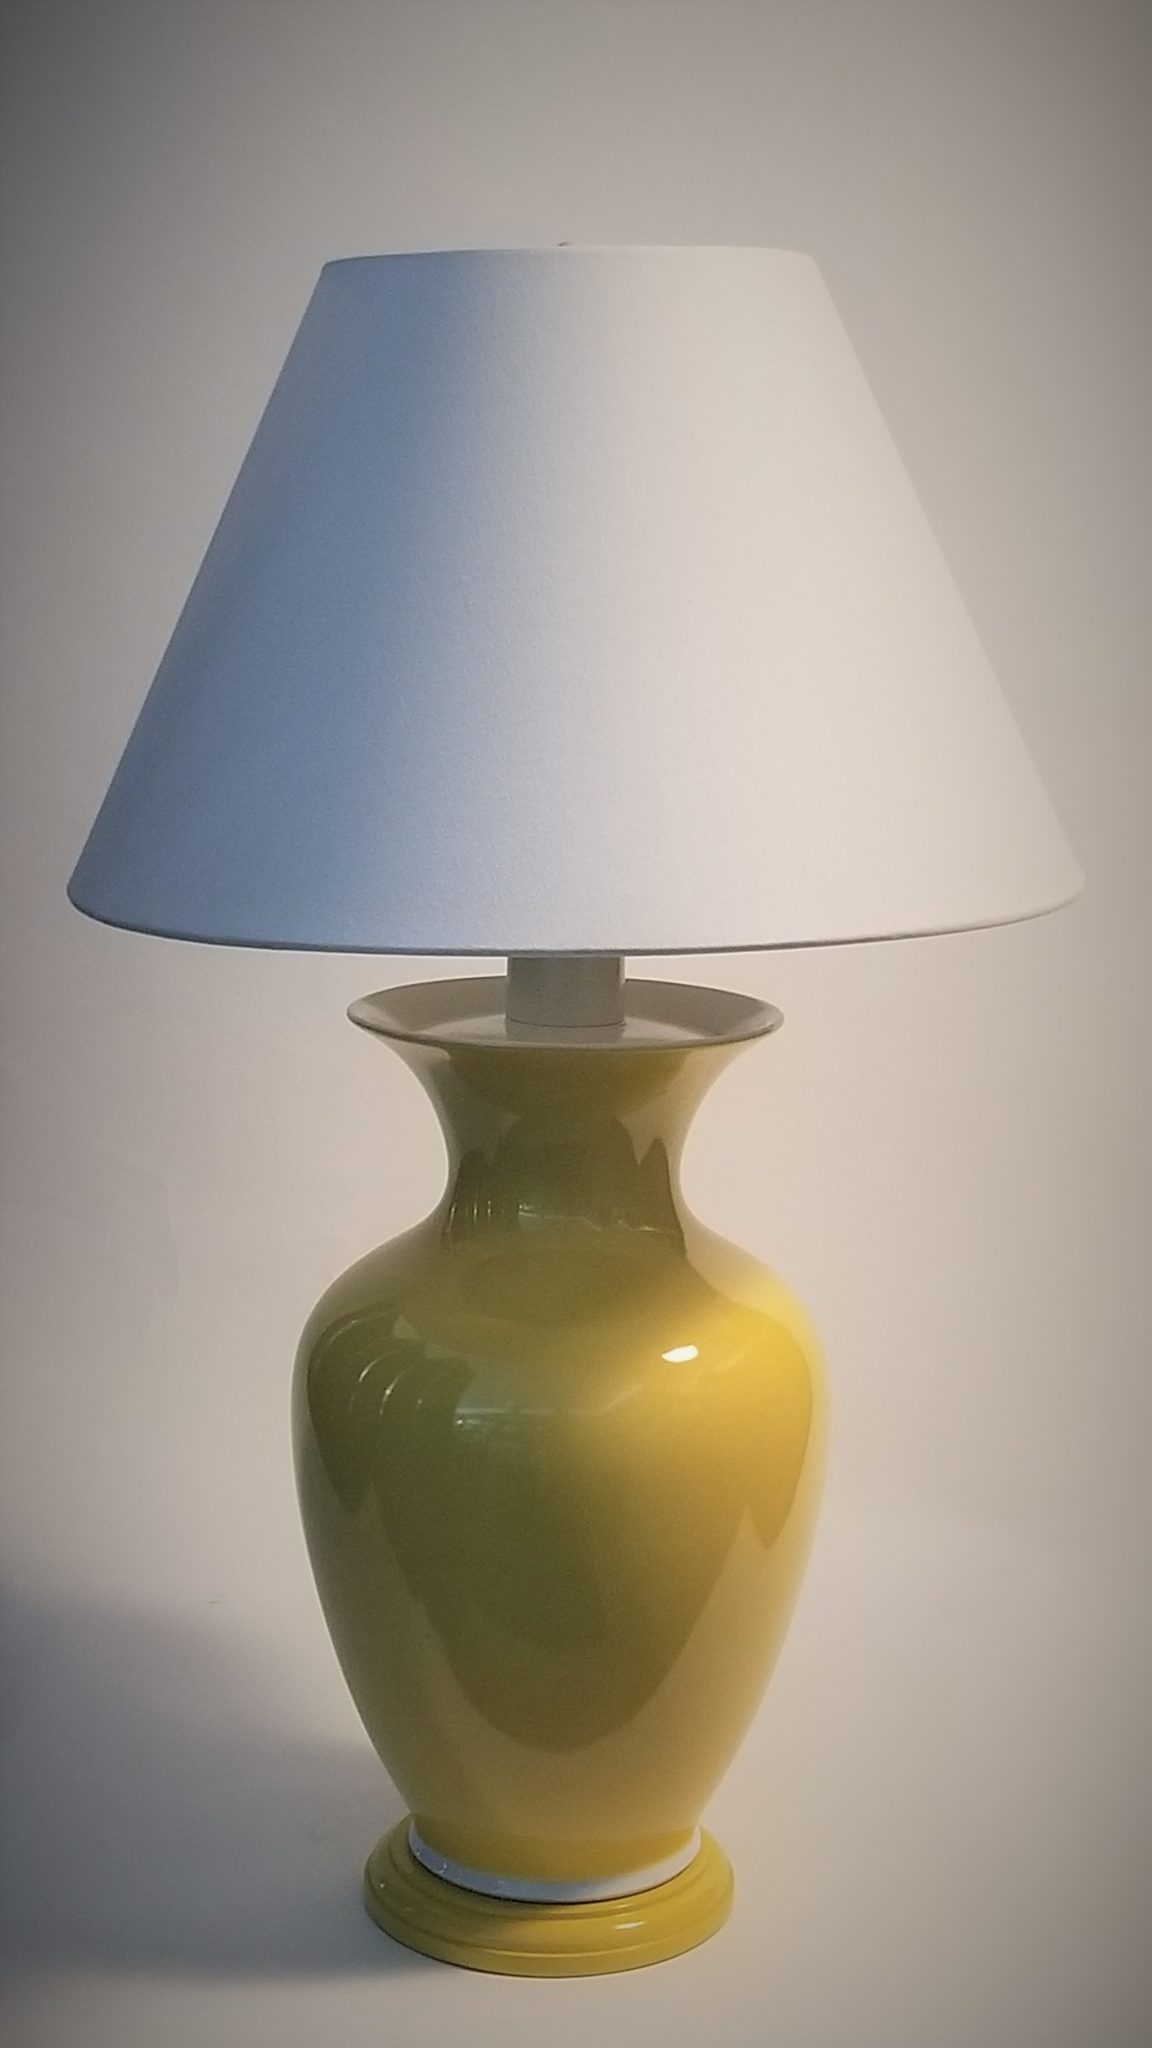 Lighting, Sold - Vintage Yellow Table Lamp w/ Shade - Rubbish Interiors